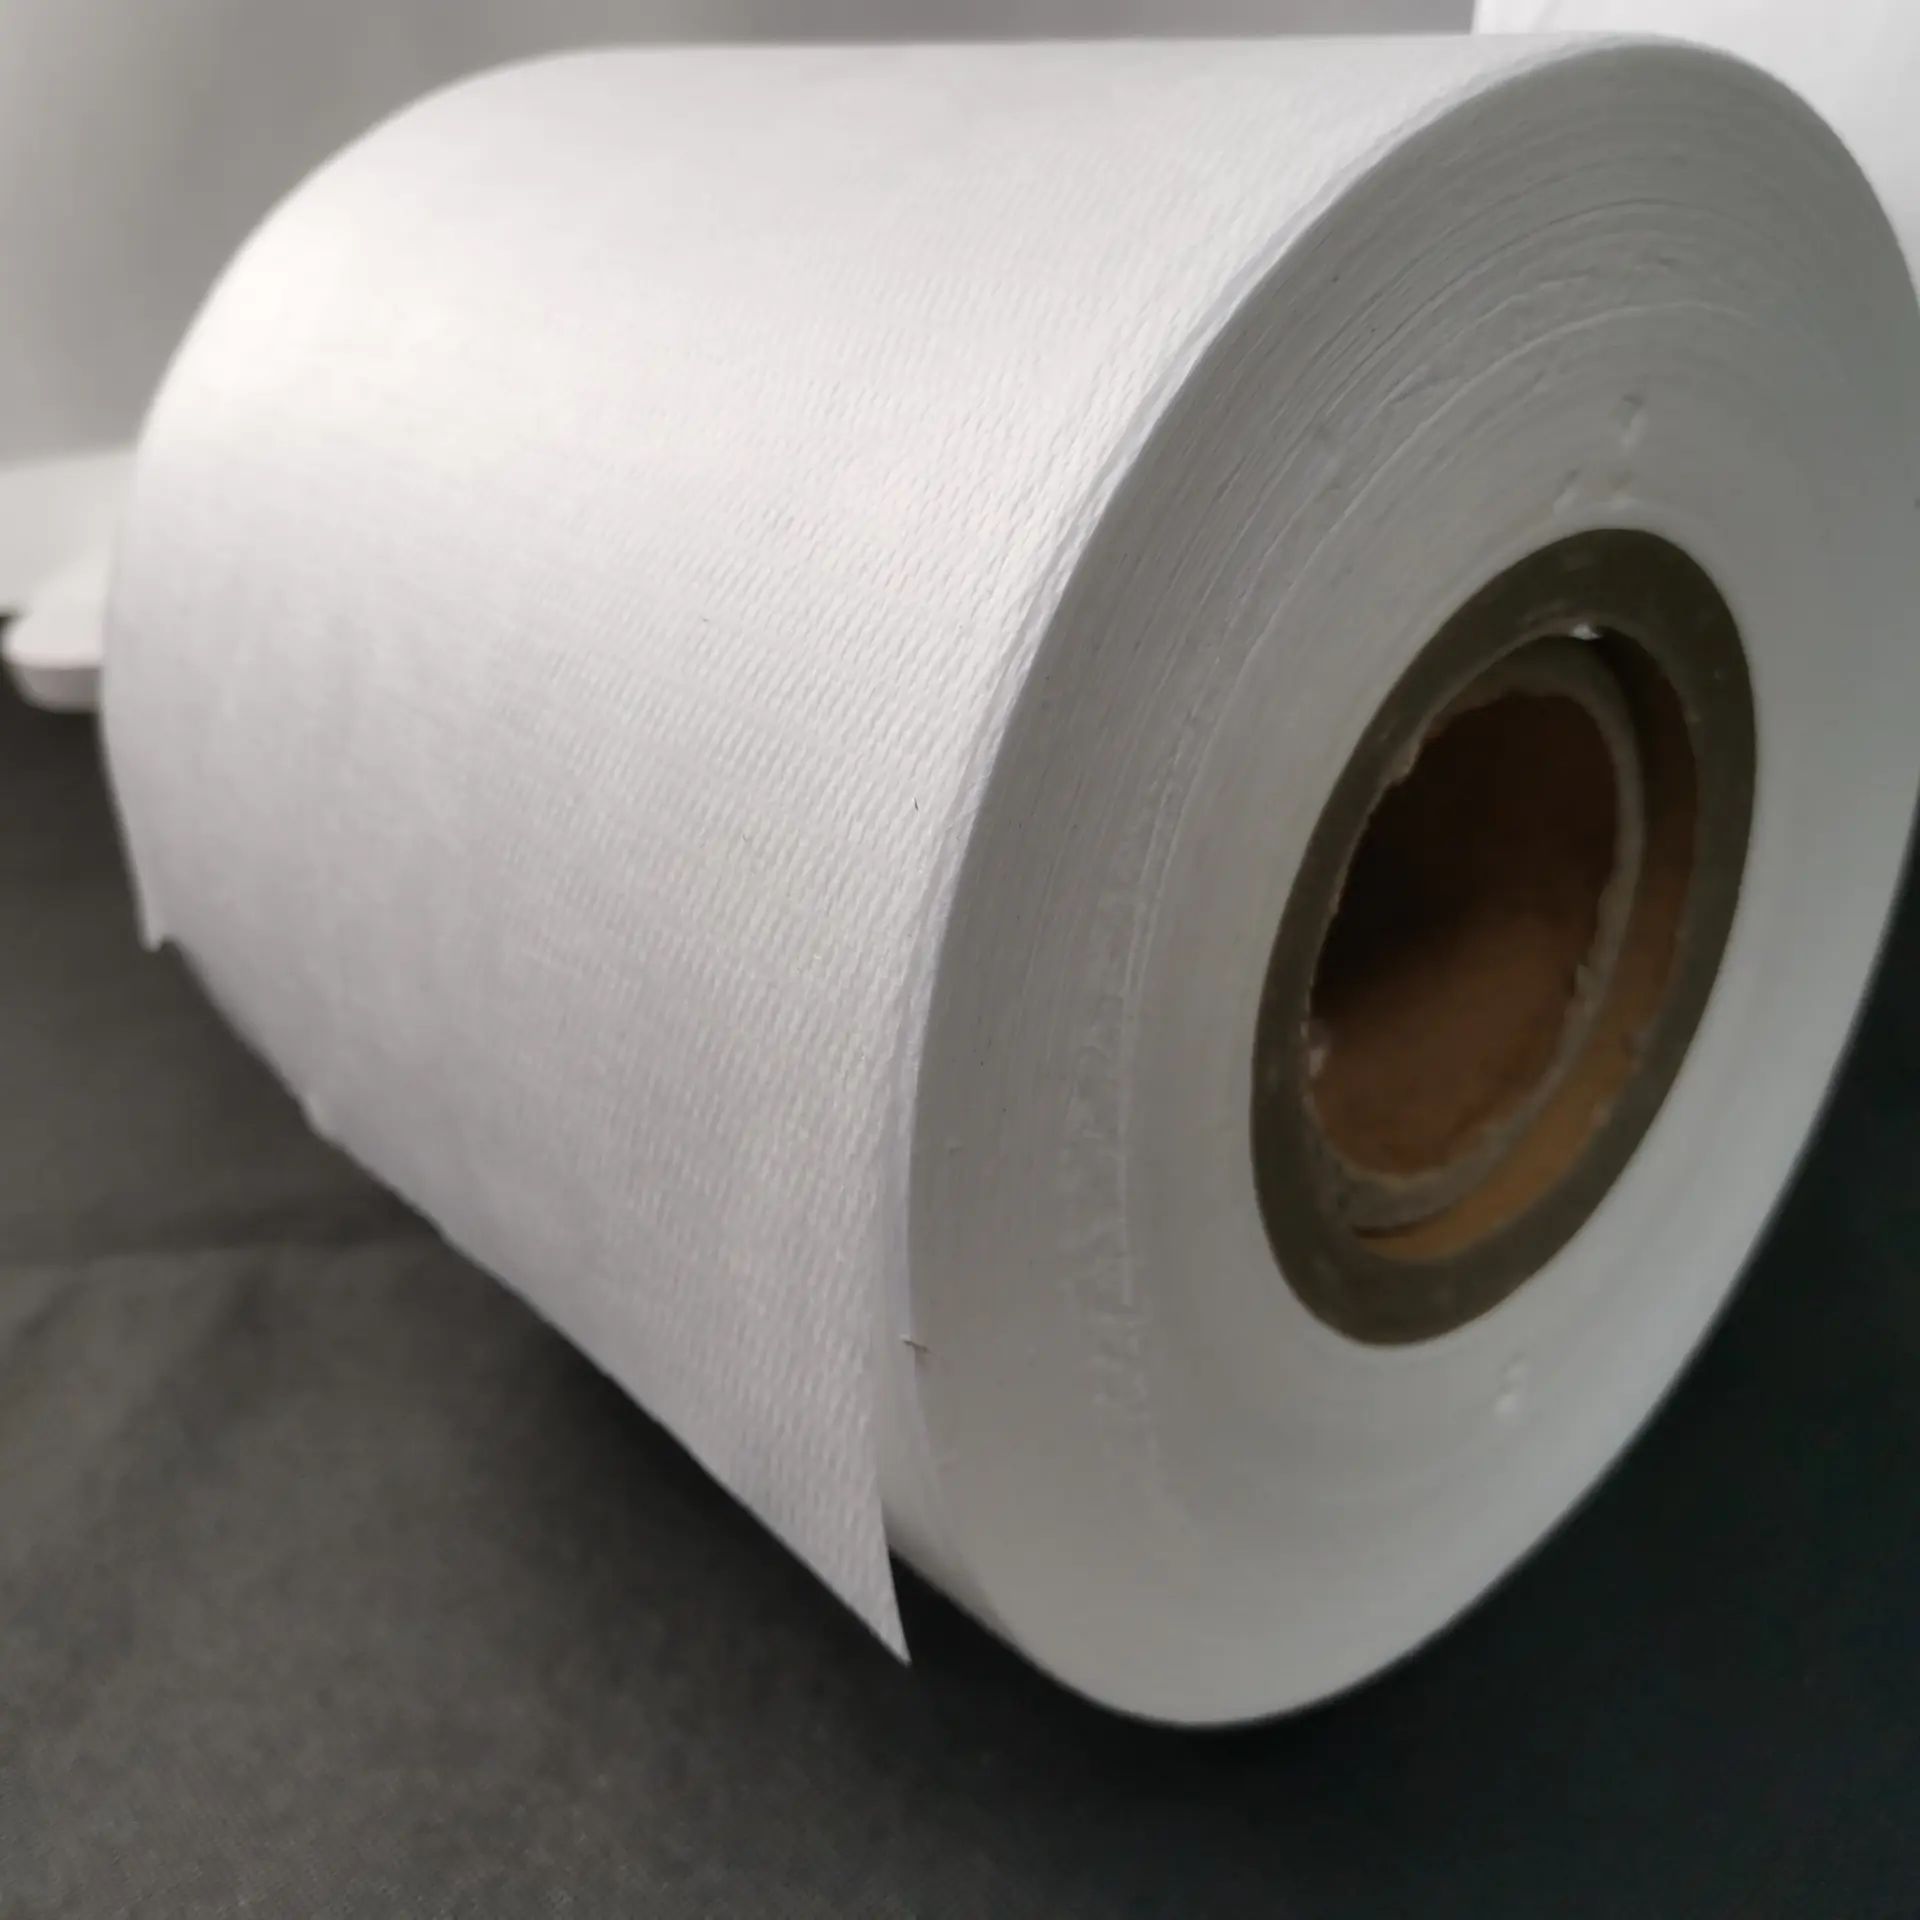 25gsm Melt Blown Nonwoven Fabric for Face Mask Filter Layer 175mm